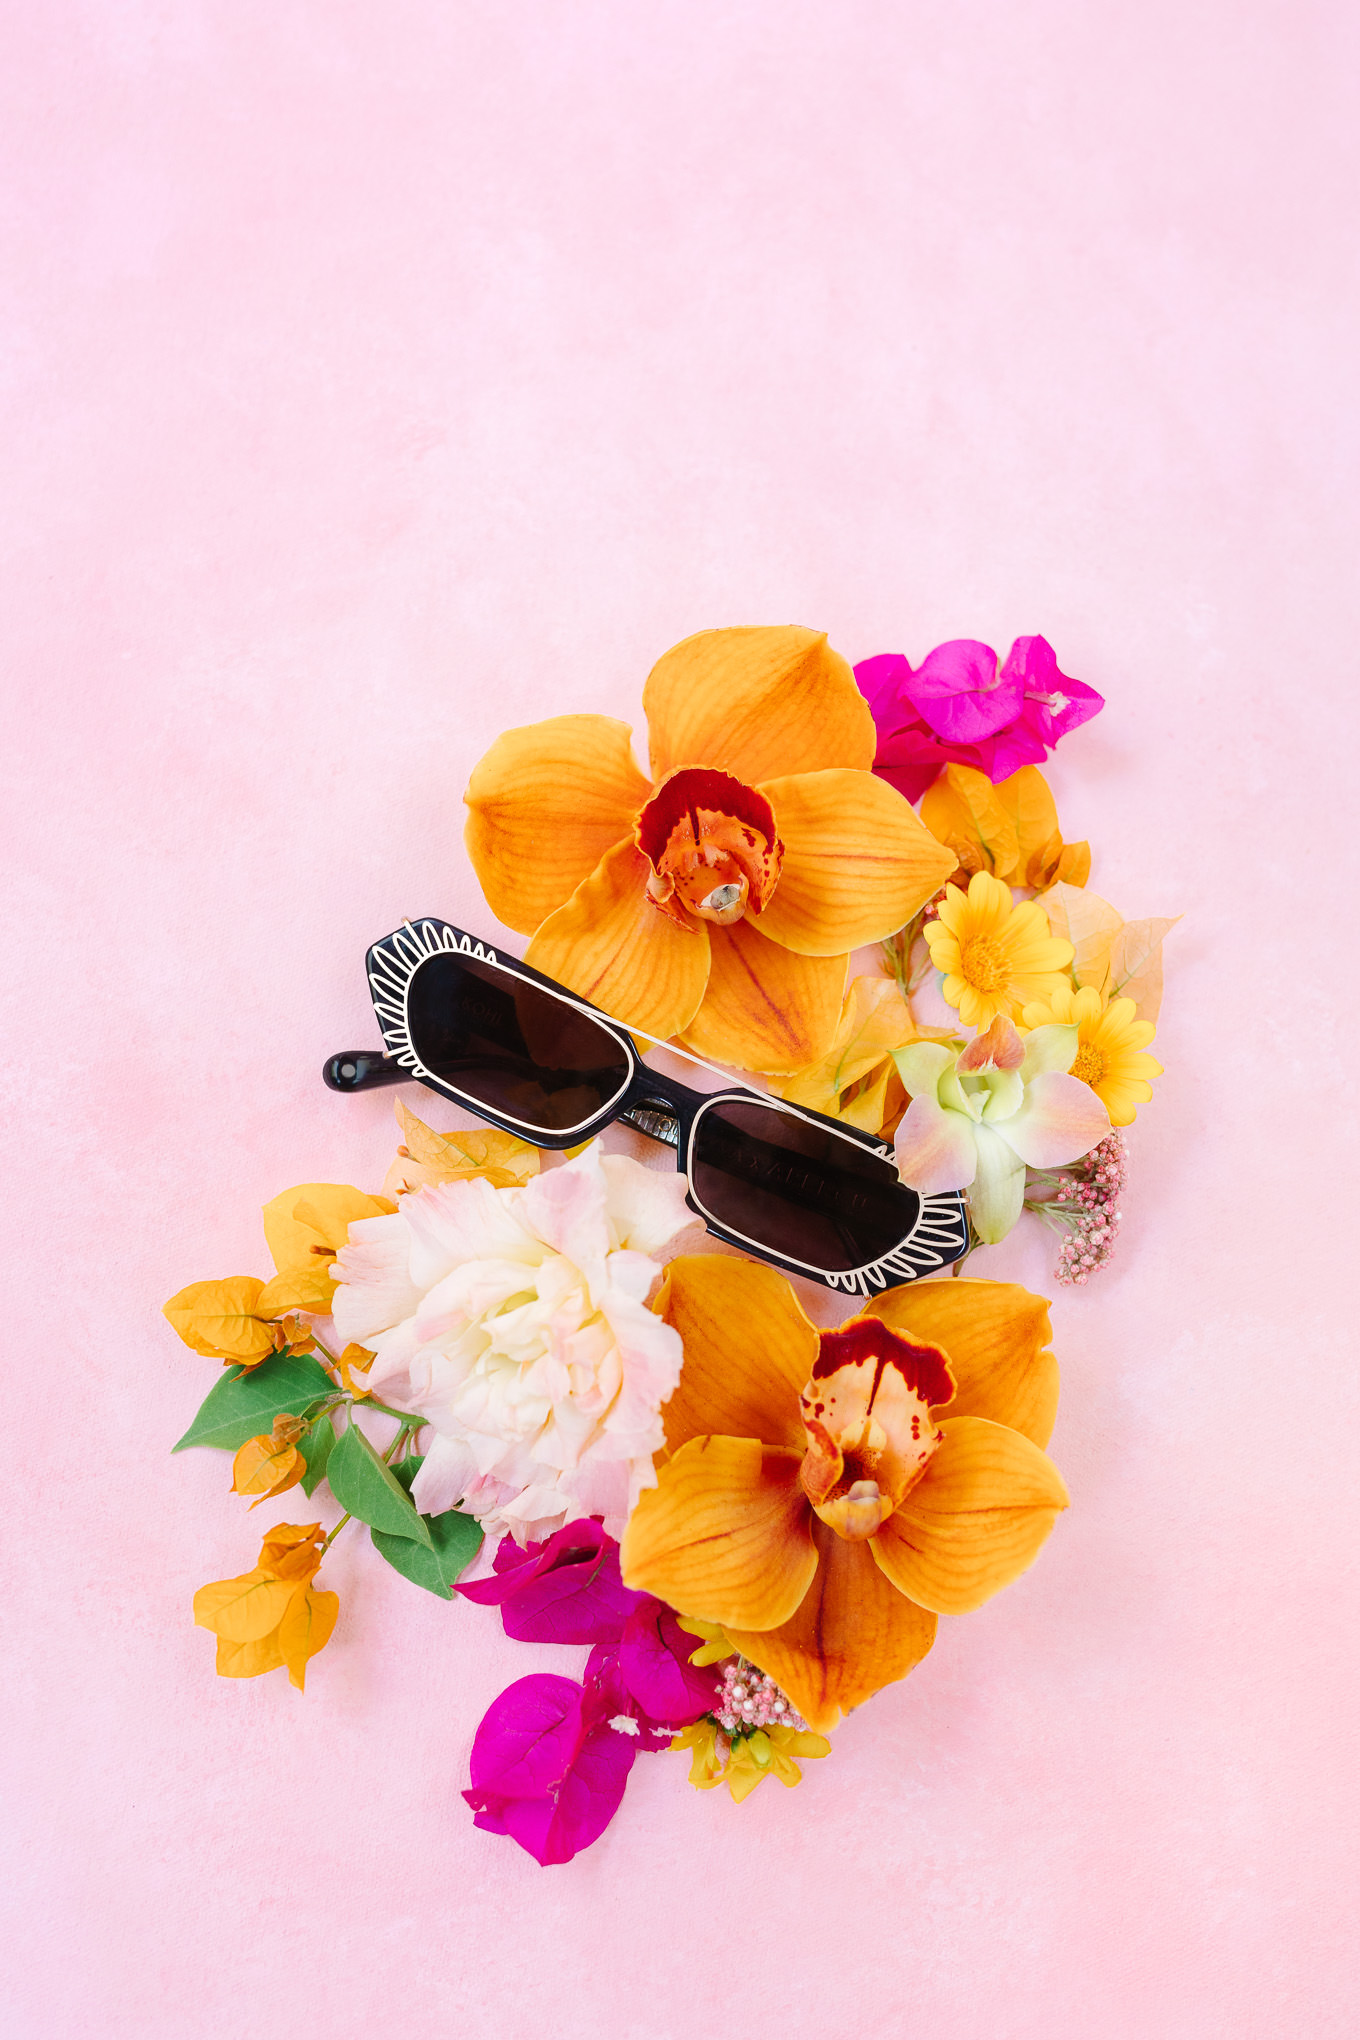 Funky black sunglasses in floral flatlay | Kindred Presets x Mary Costa Photography Sands Hotel Ad Campaign | Colorful Palm Springs wedding photography | #palmspringsphotographer #lightroompresets #sandshotel #pinkhotel   Source: Mary Costa Photography | Los Angeles